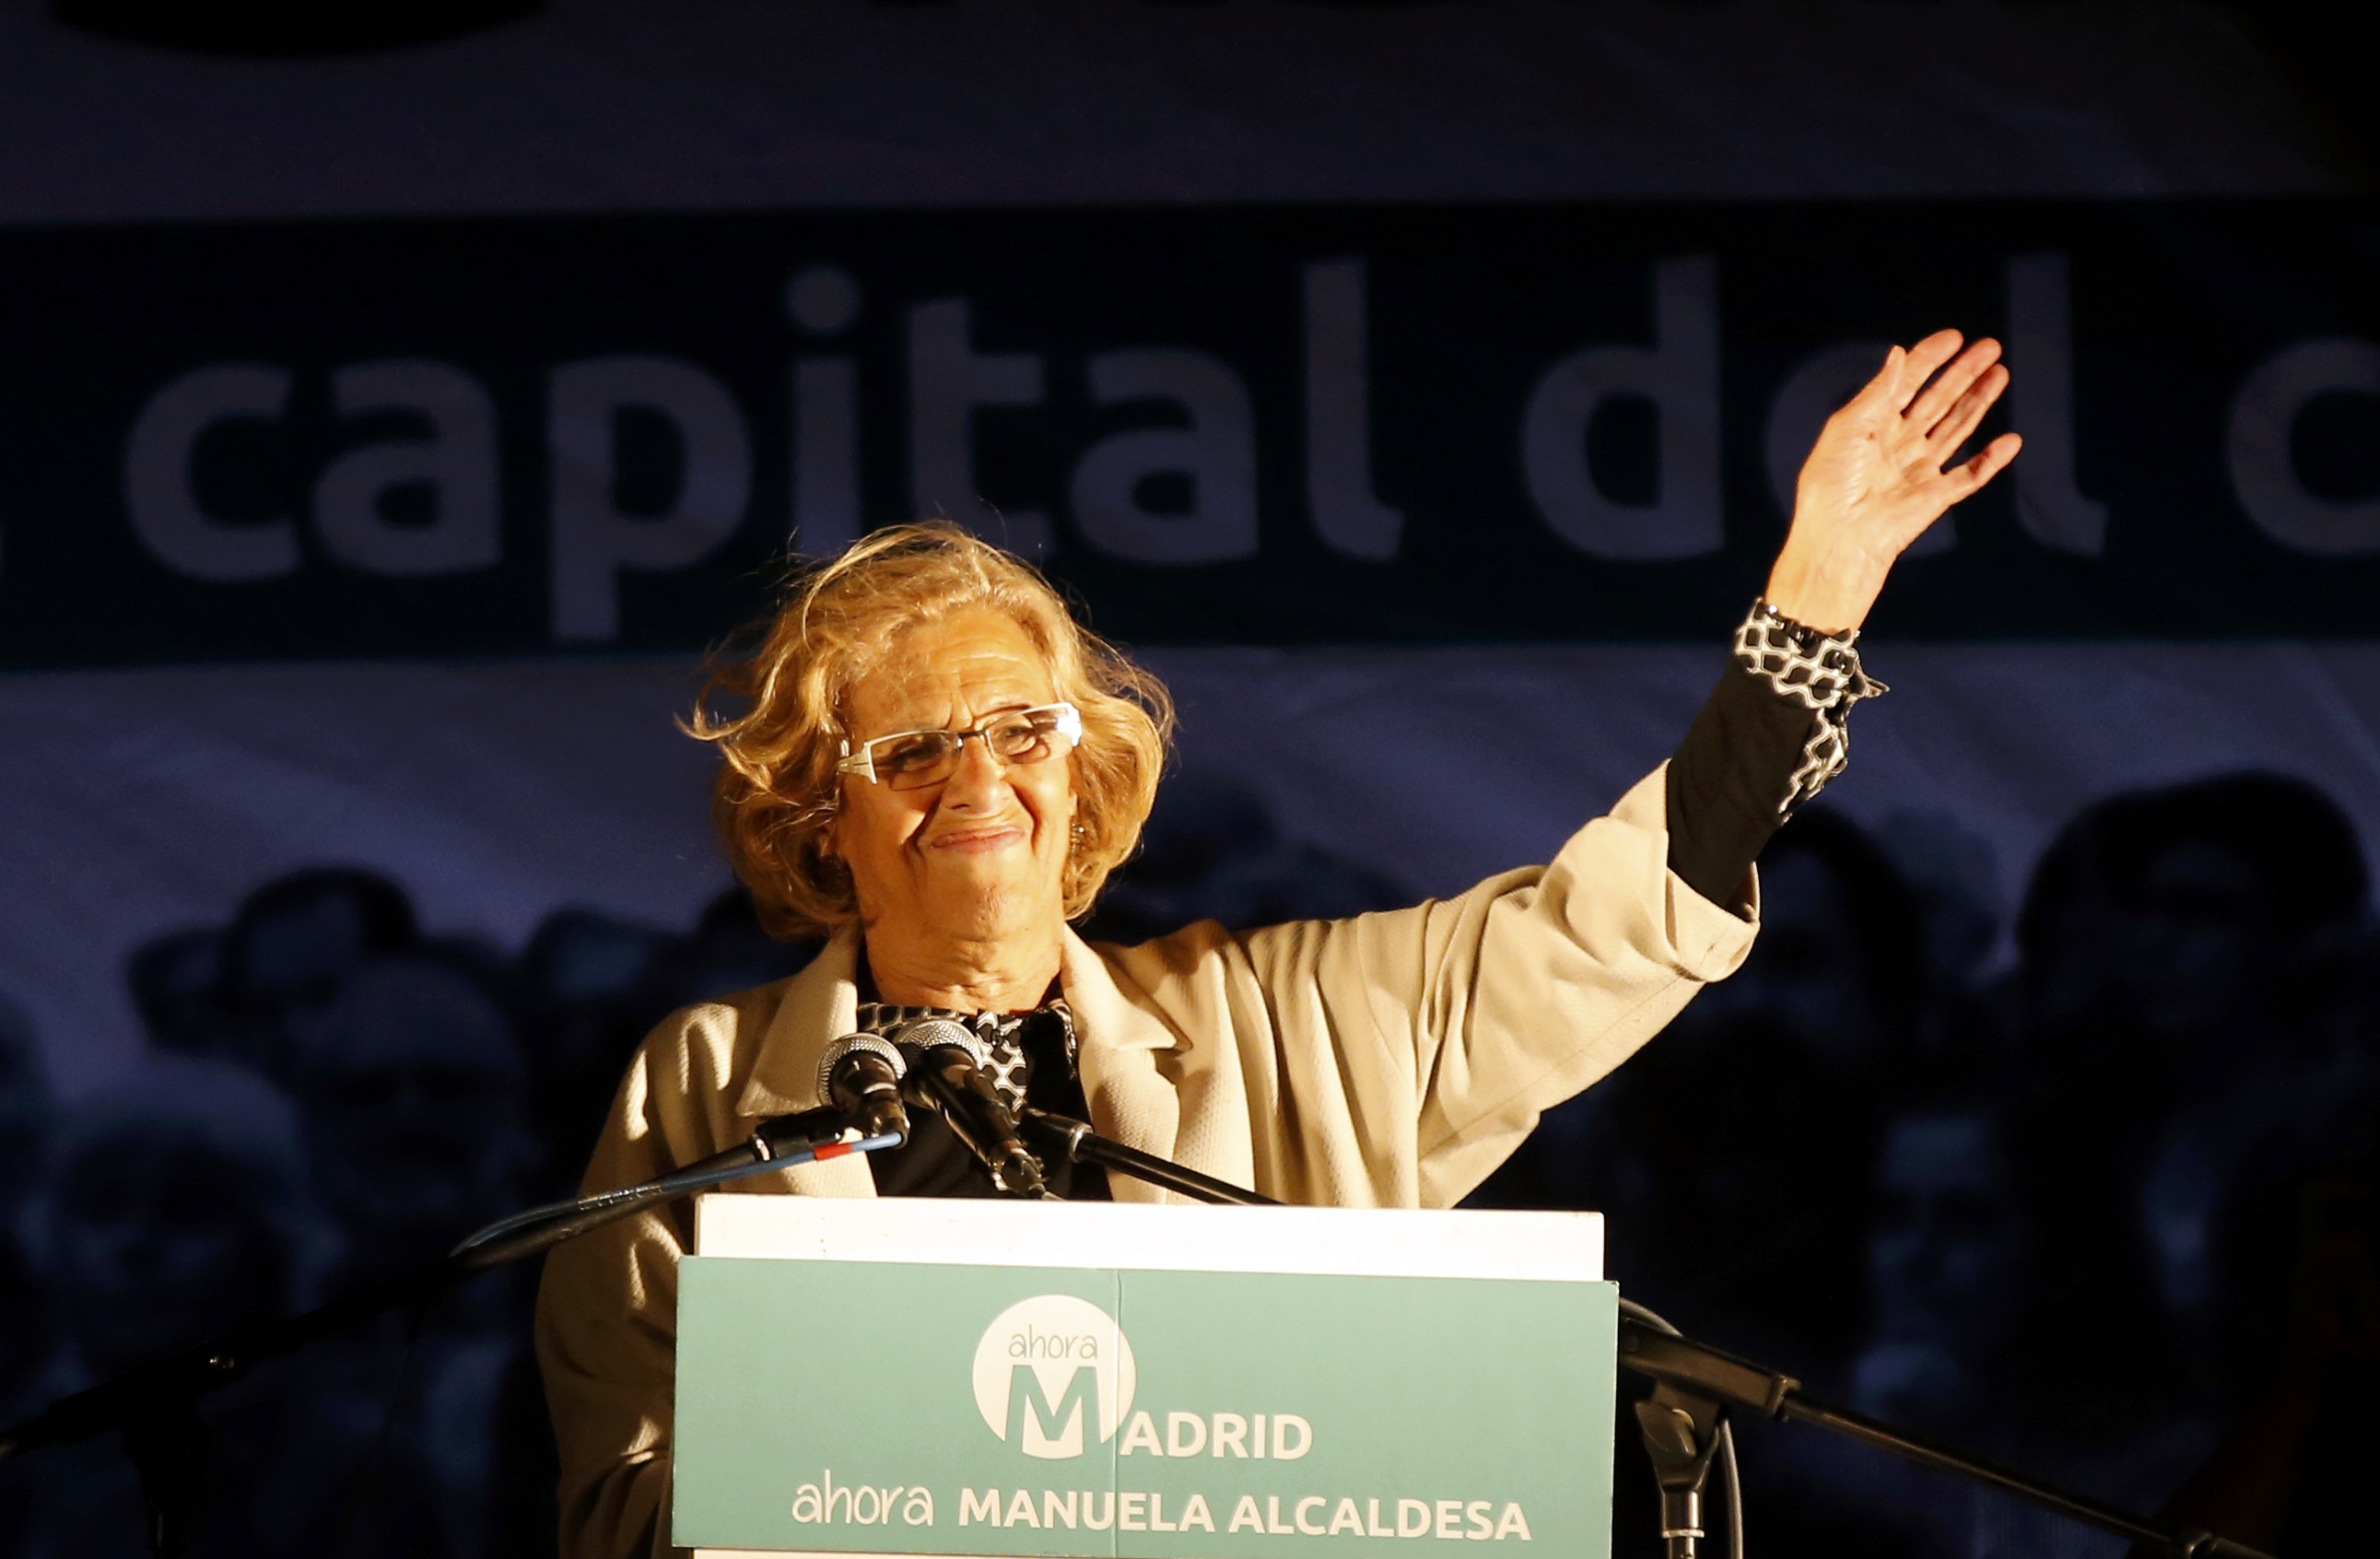 Ahora Madrid (Now Madrid) local candidate, Manuela Carmena, gestures as she delivers a speech at party's meeting area after the regional and municipal elections in Madrid, Spain, May 24, 2015. Spain's ruling People's Party (PP) has won the municipal election in the country's capital Madrid but it could lose control of the city council for the first time since 1991, official data with 97 percent of the votes counted showed. REUTERS/Paul Hanna